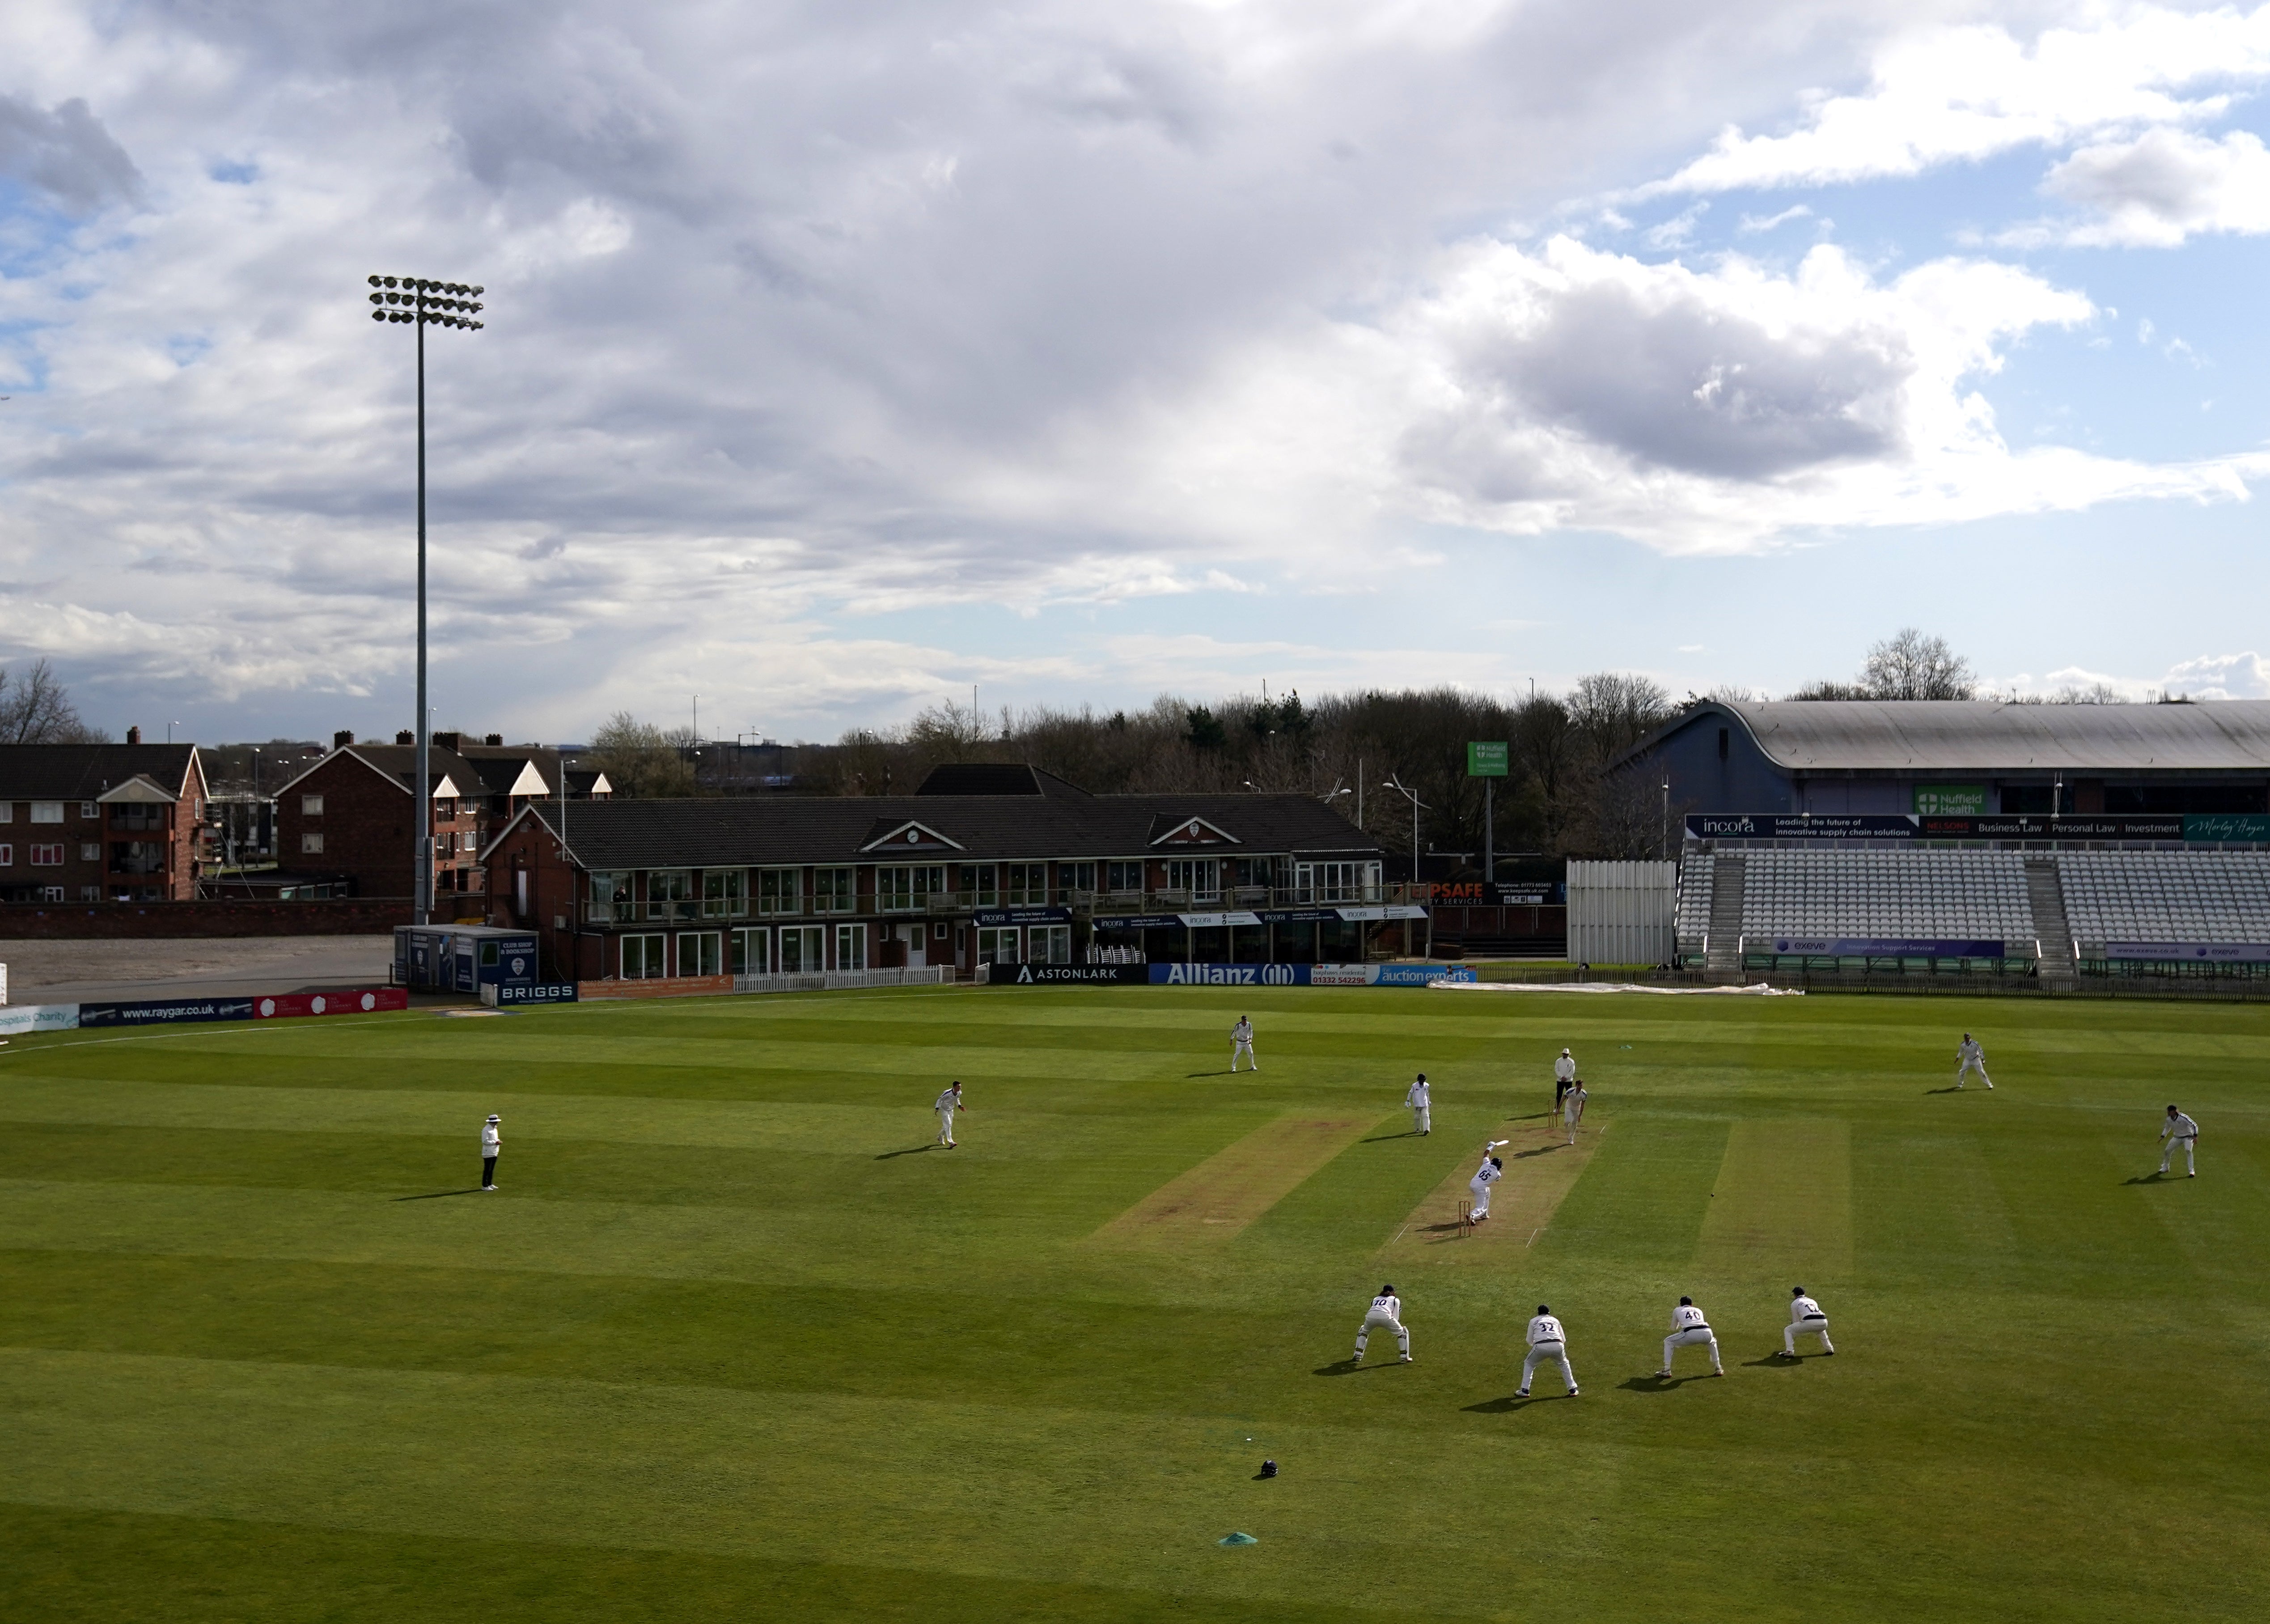 Essex's match at Derbyshire was abandoned